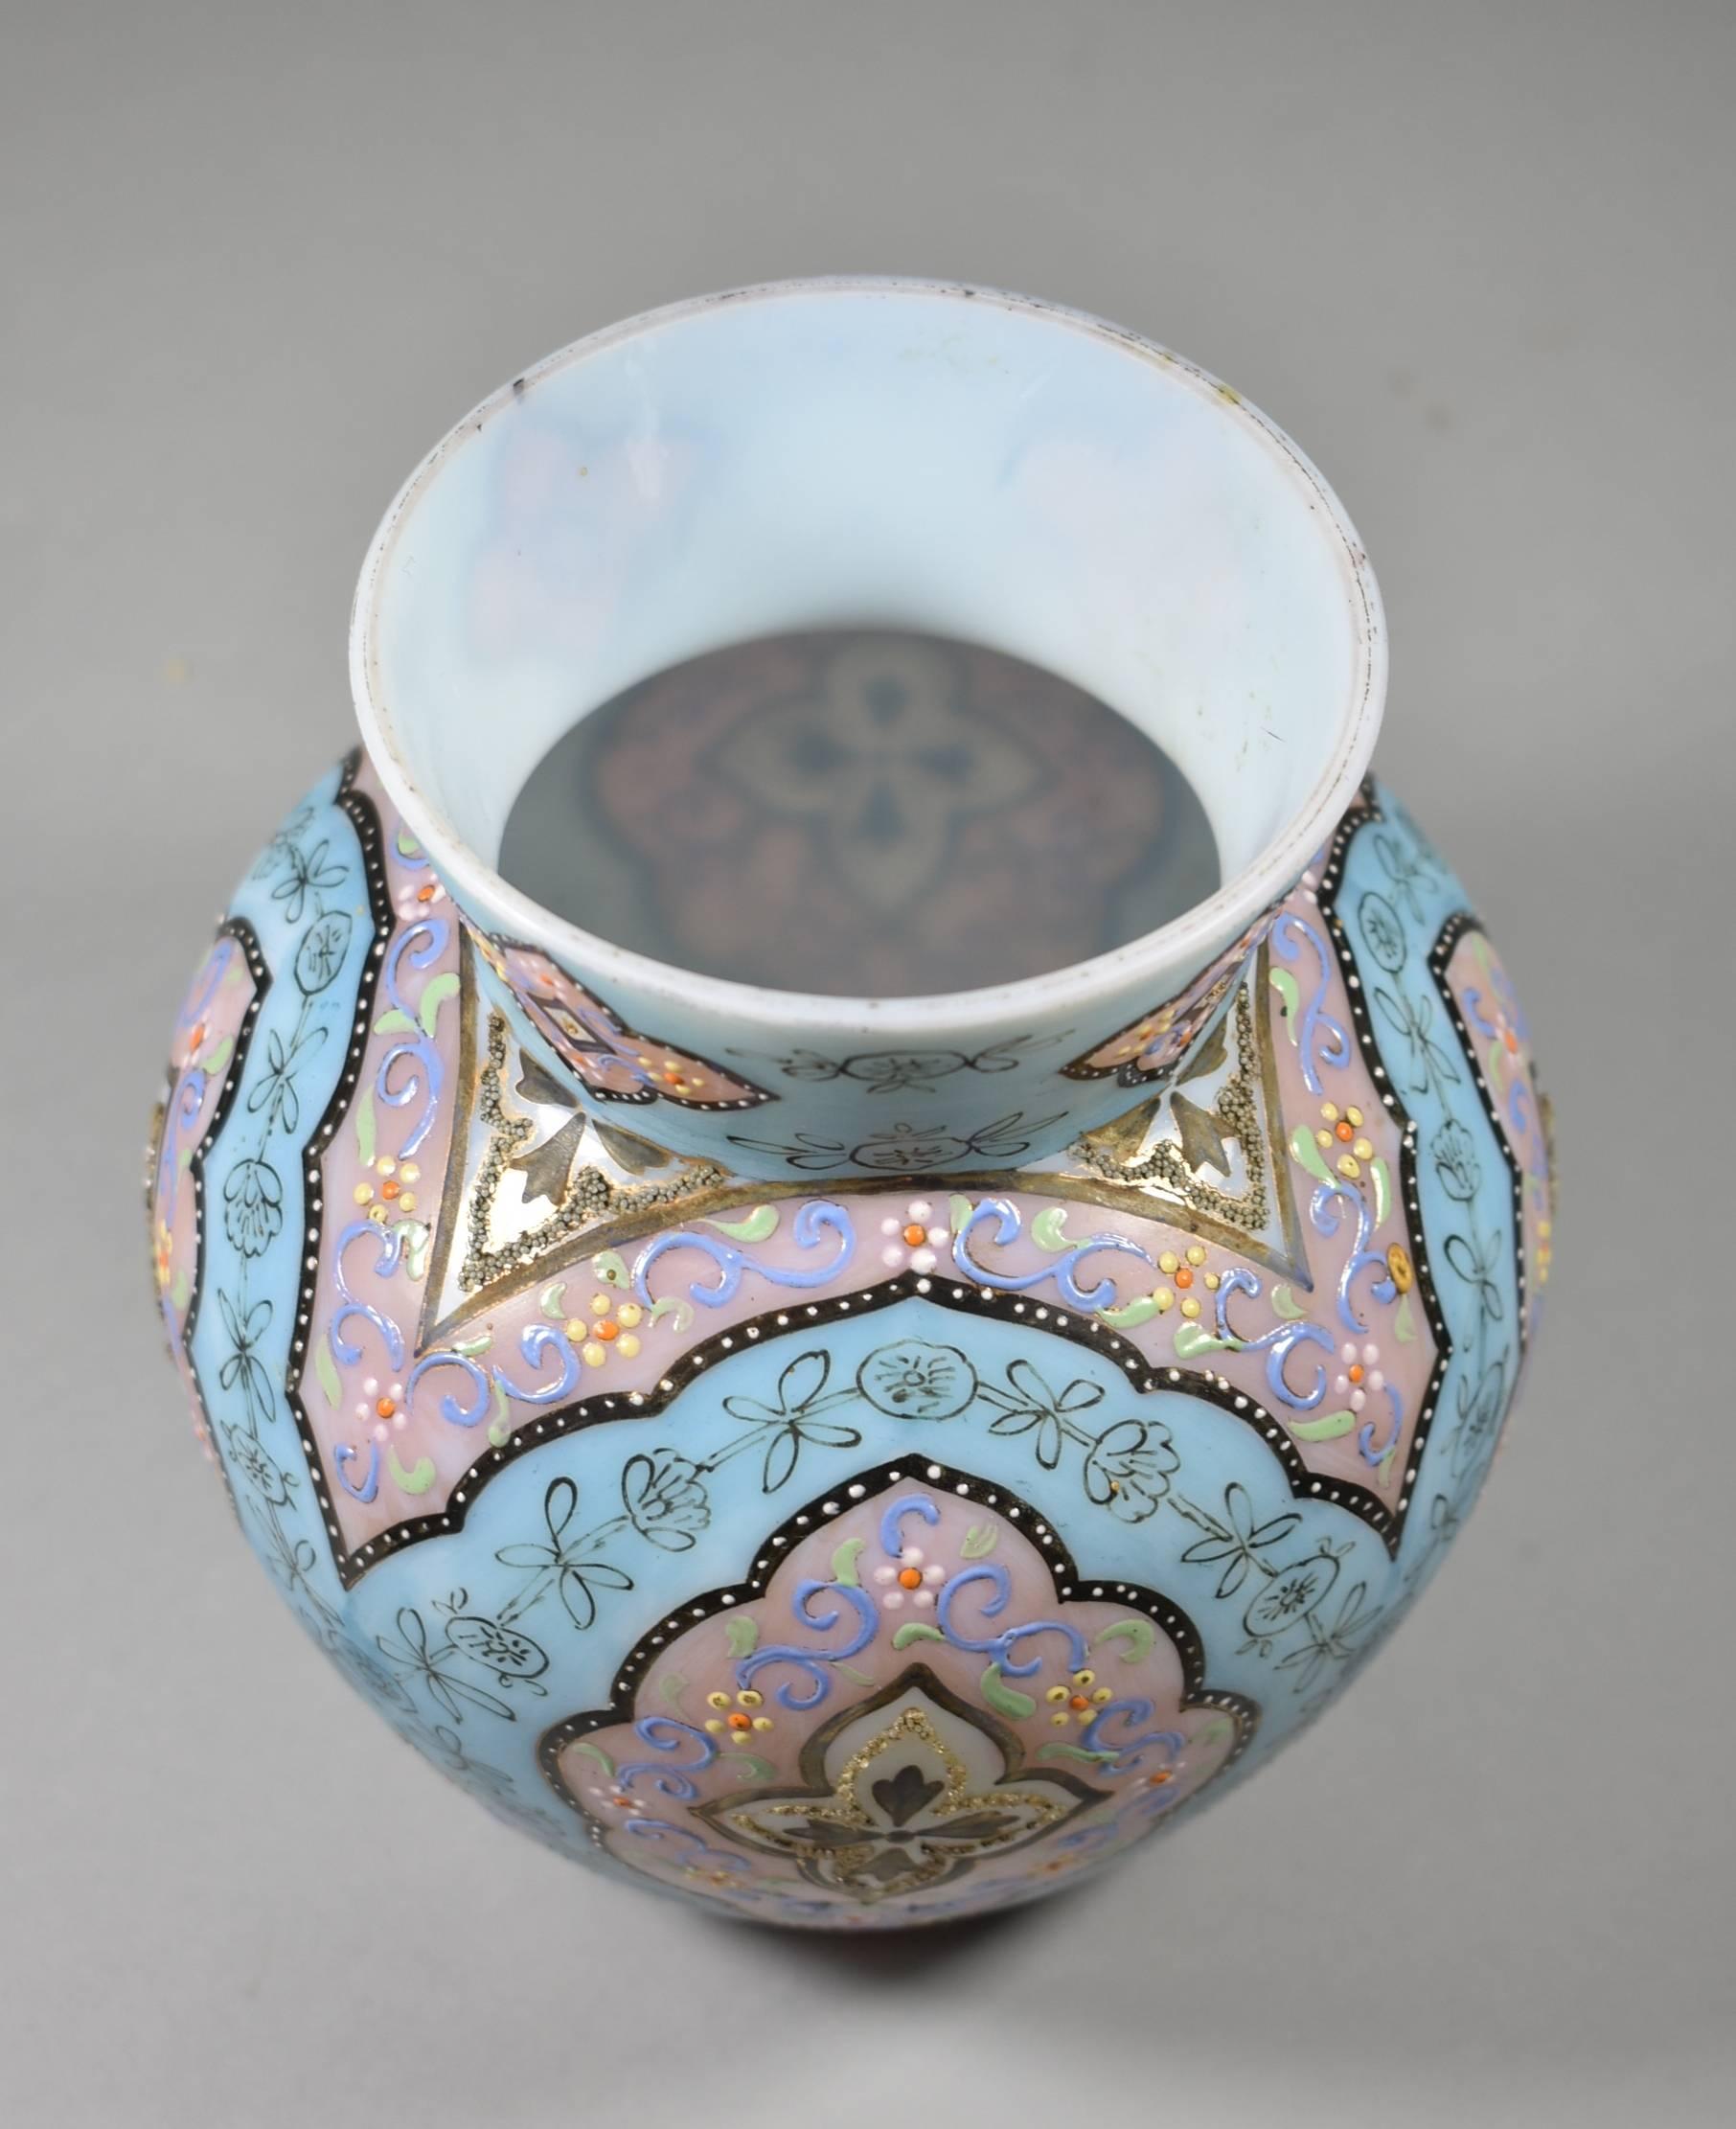 A beautiful Moroccan Pattern orientalist Persian enameled art glass vase by Webb. The vase is 6.5" tall and 3.5" in diameter (at opening). The turquoise and rose colored background is accented with blue, black and gold enamel work. This